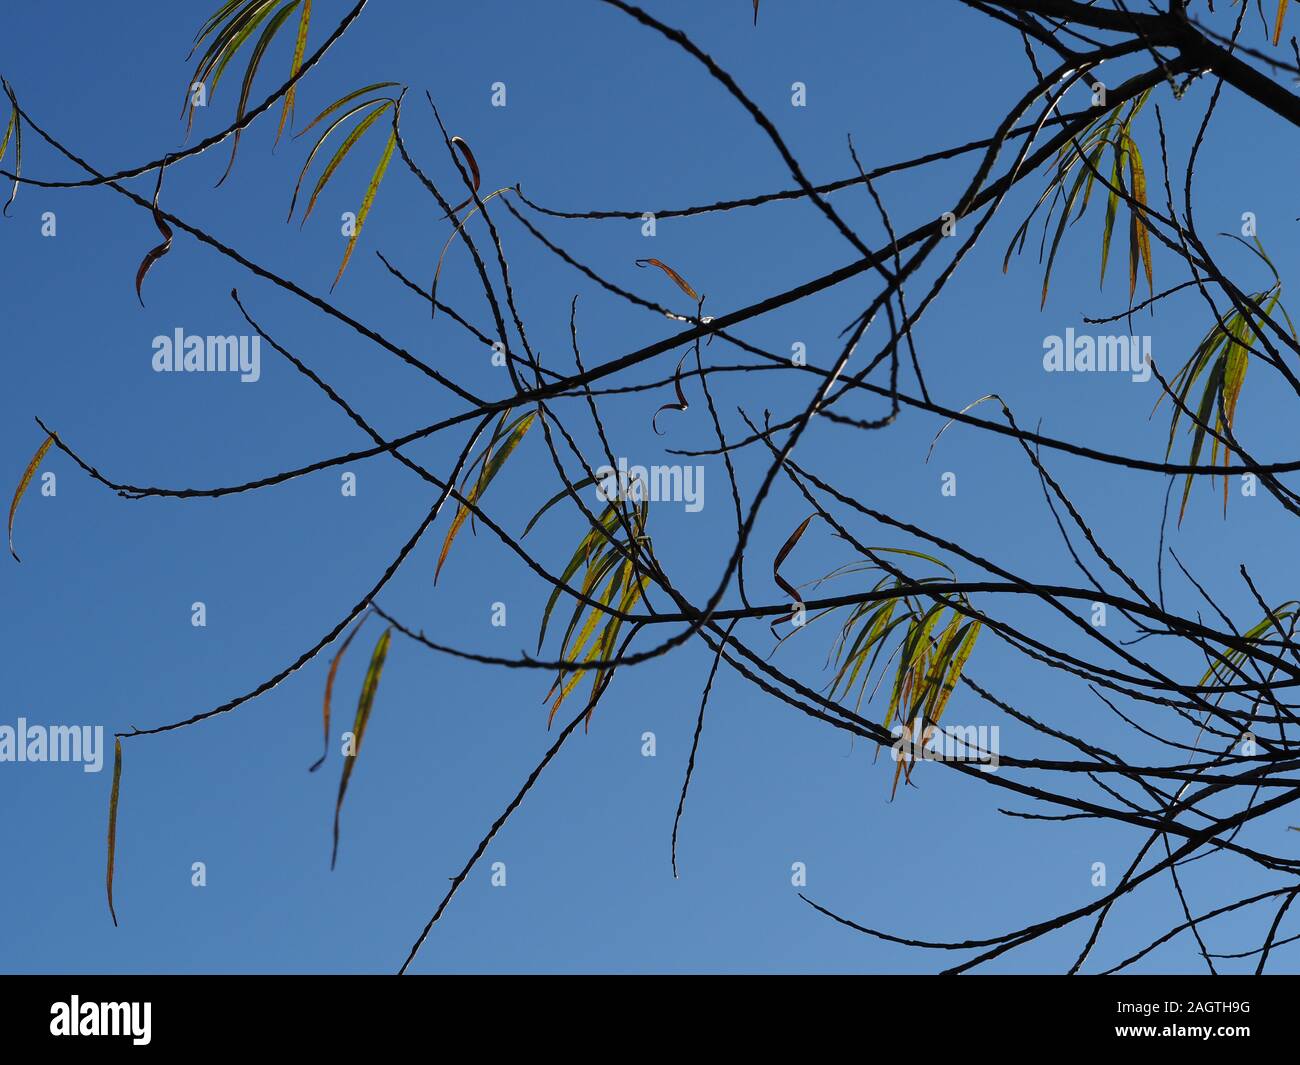 Thin branches of a young willow tree with the last few leaves in winter against a blue sky background Stock Photo